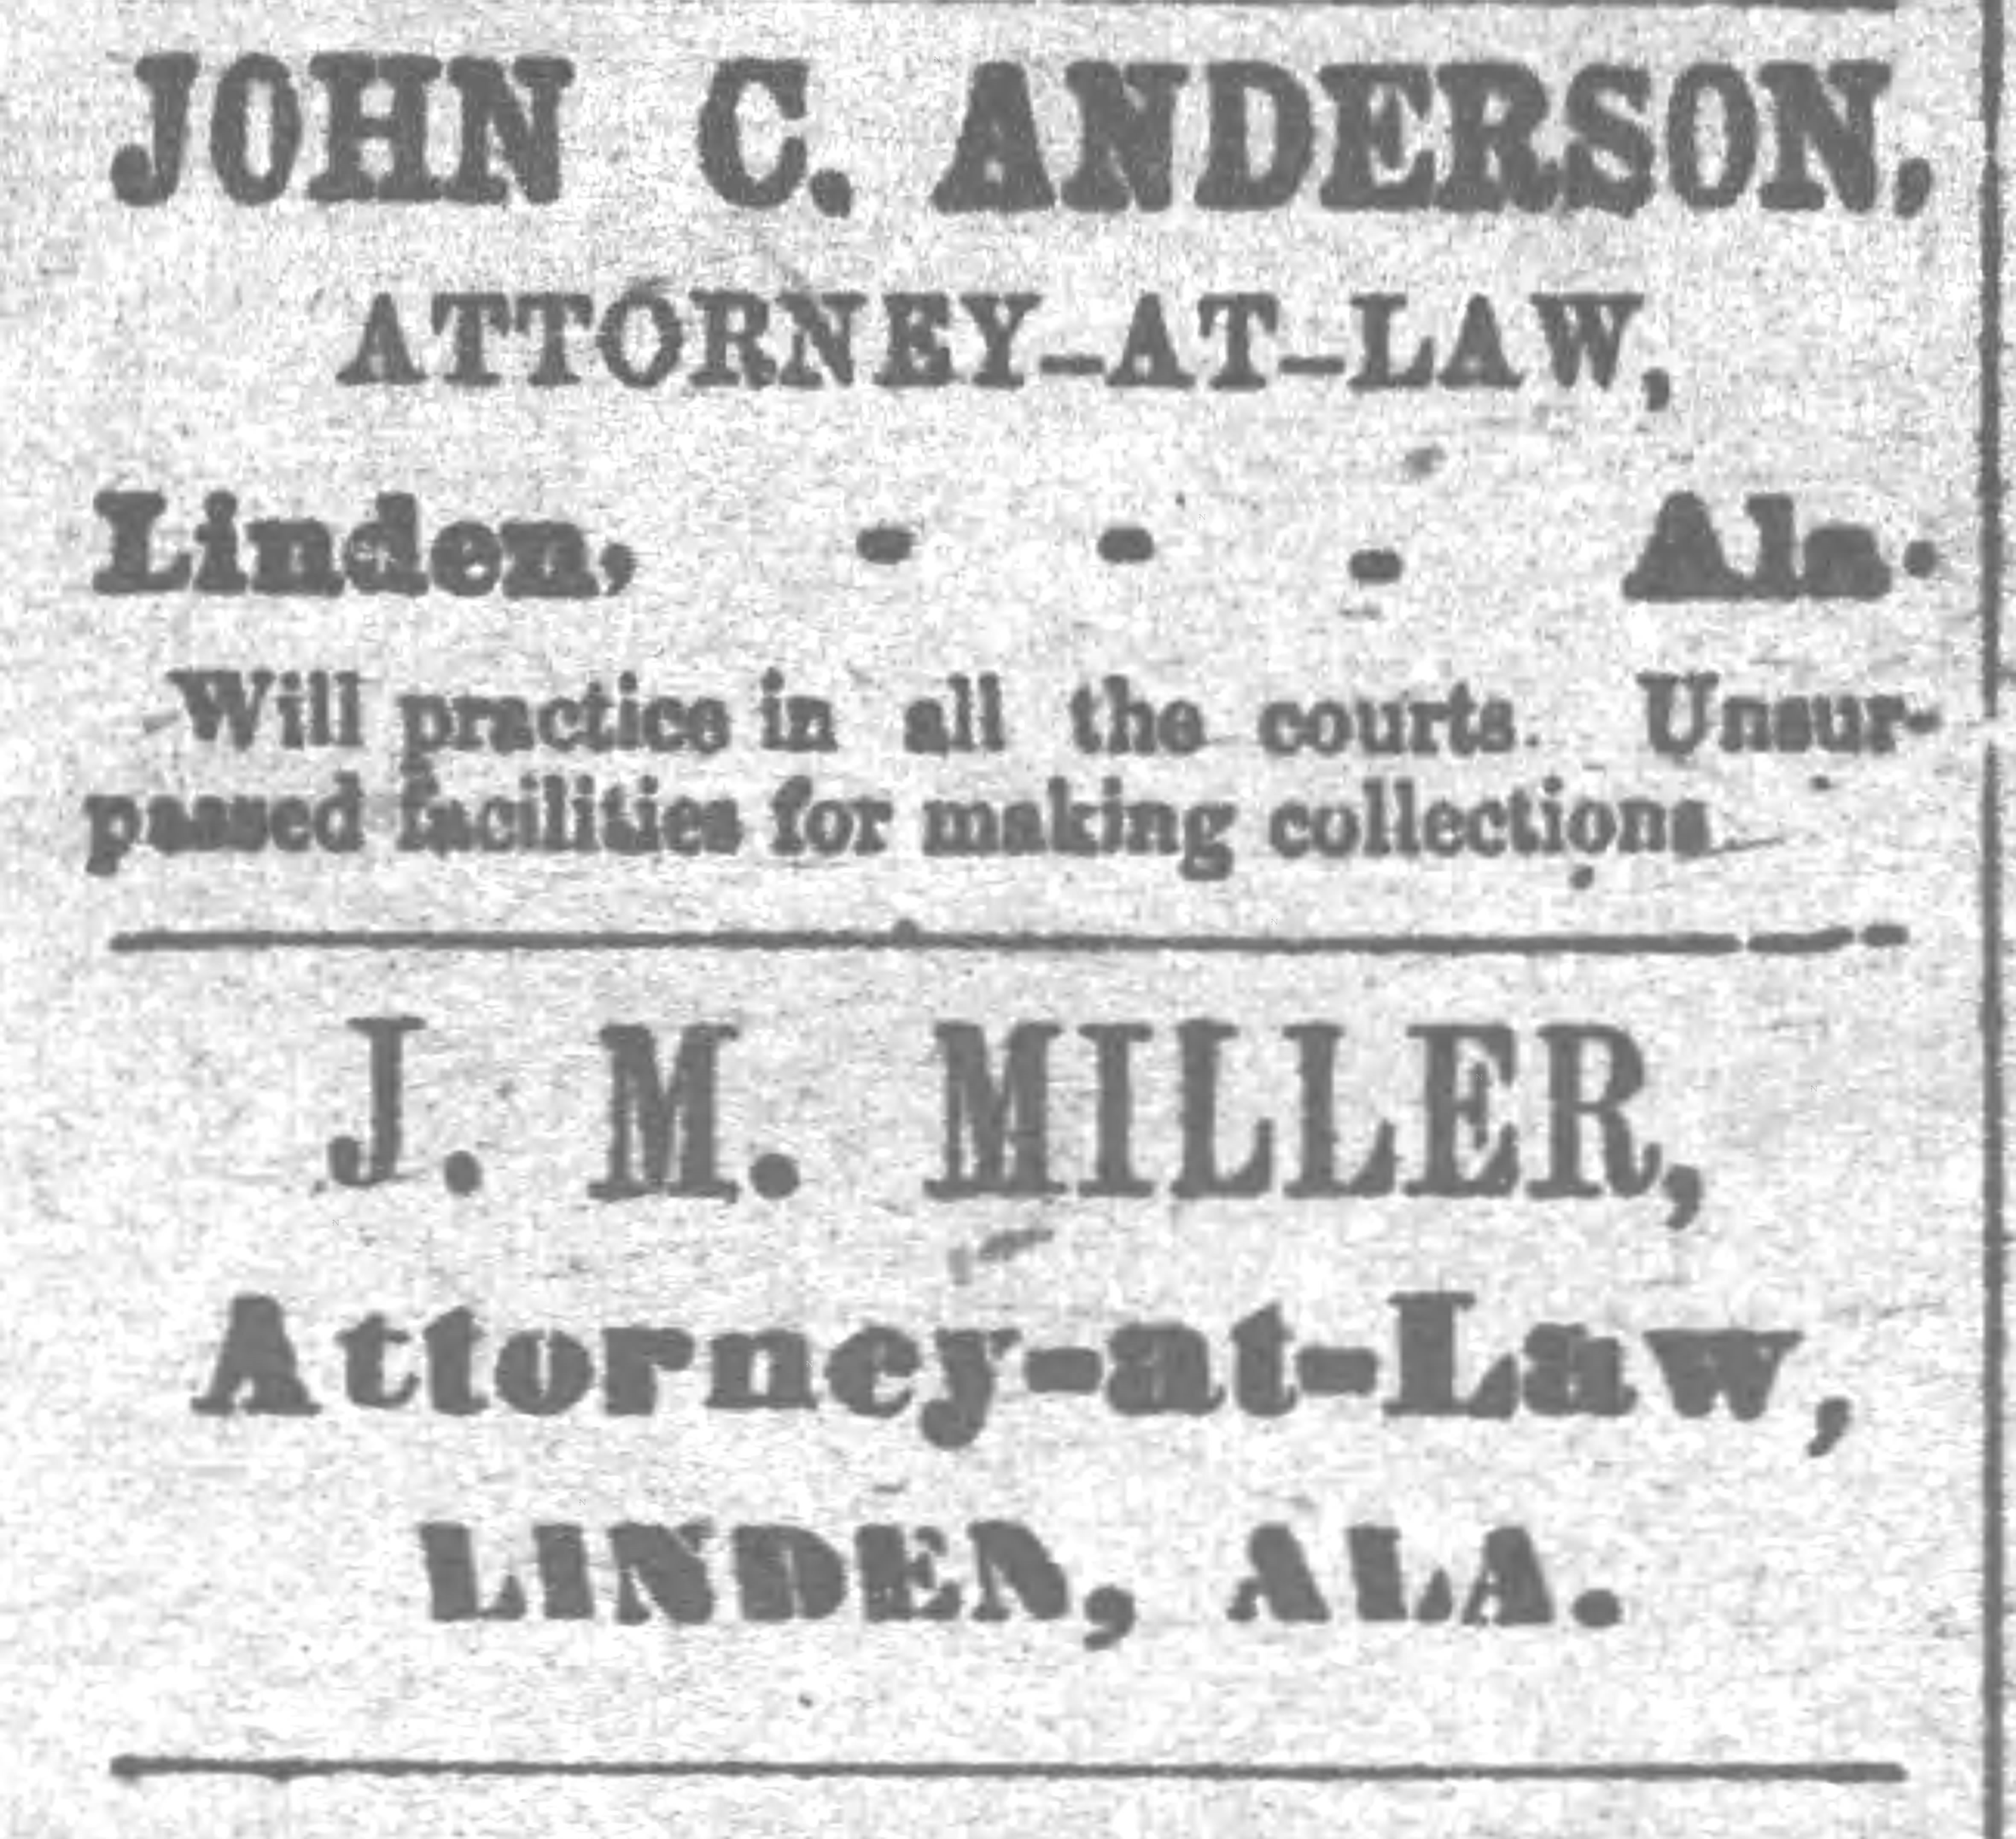 PATRON – Names of Judges, personal news, McClinton, Beck, Dove and other names mentioned  in Linden news in 1892